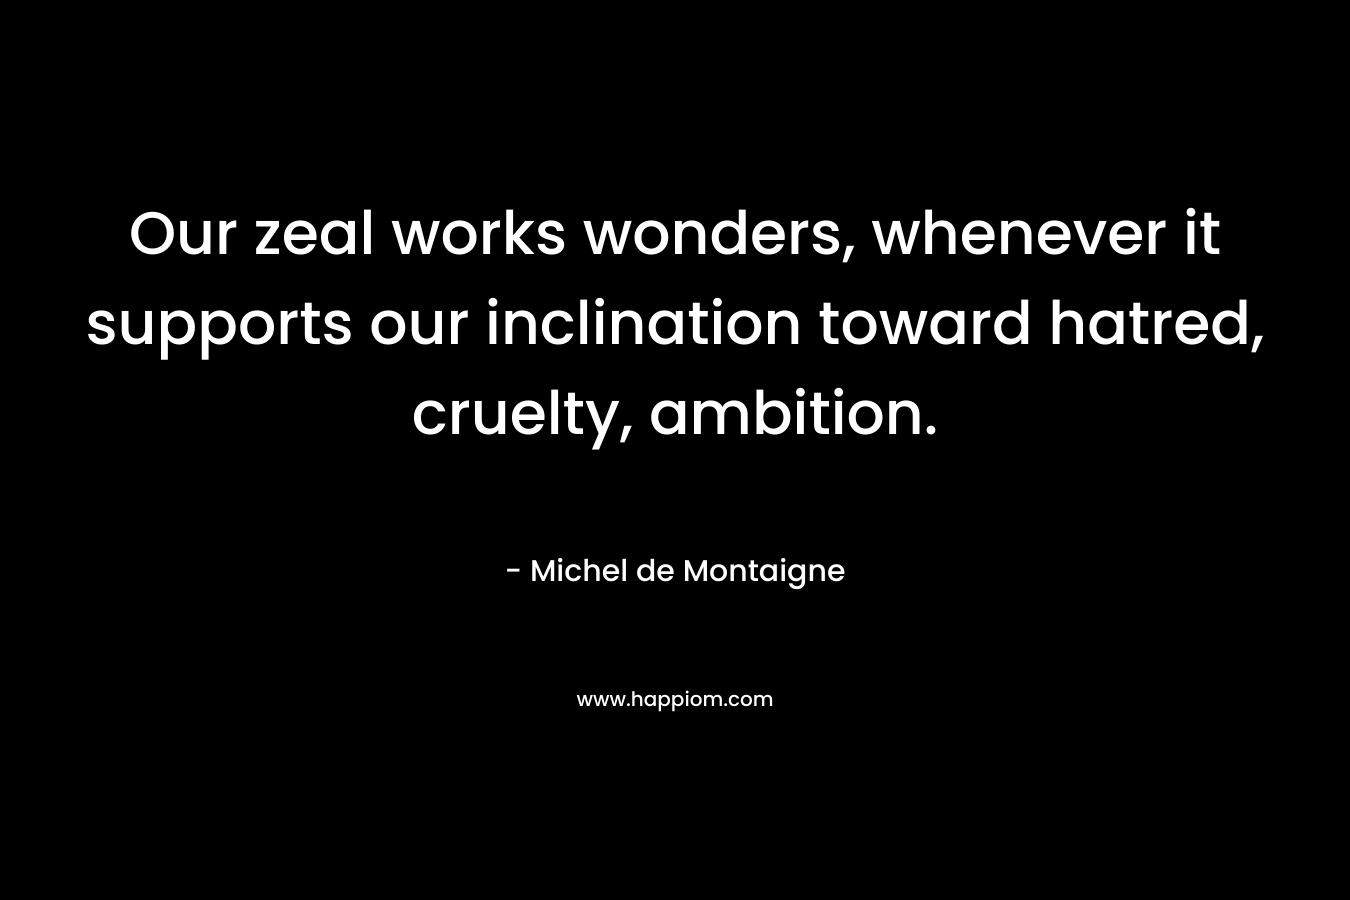 Our zeal works wonders, whenever it supports our inclination toward hatred, cruelty, ambition.